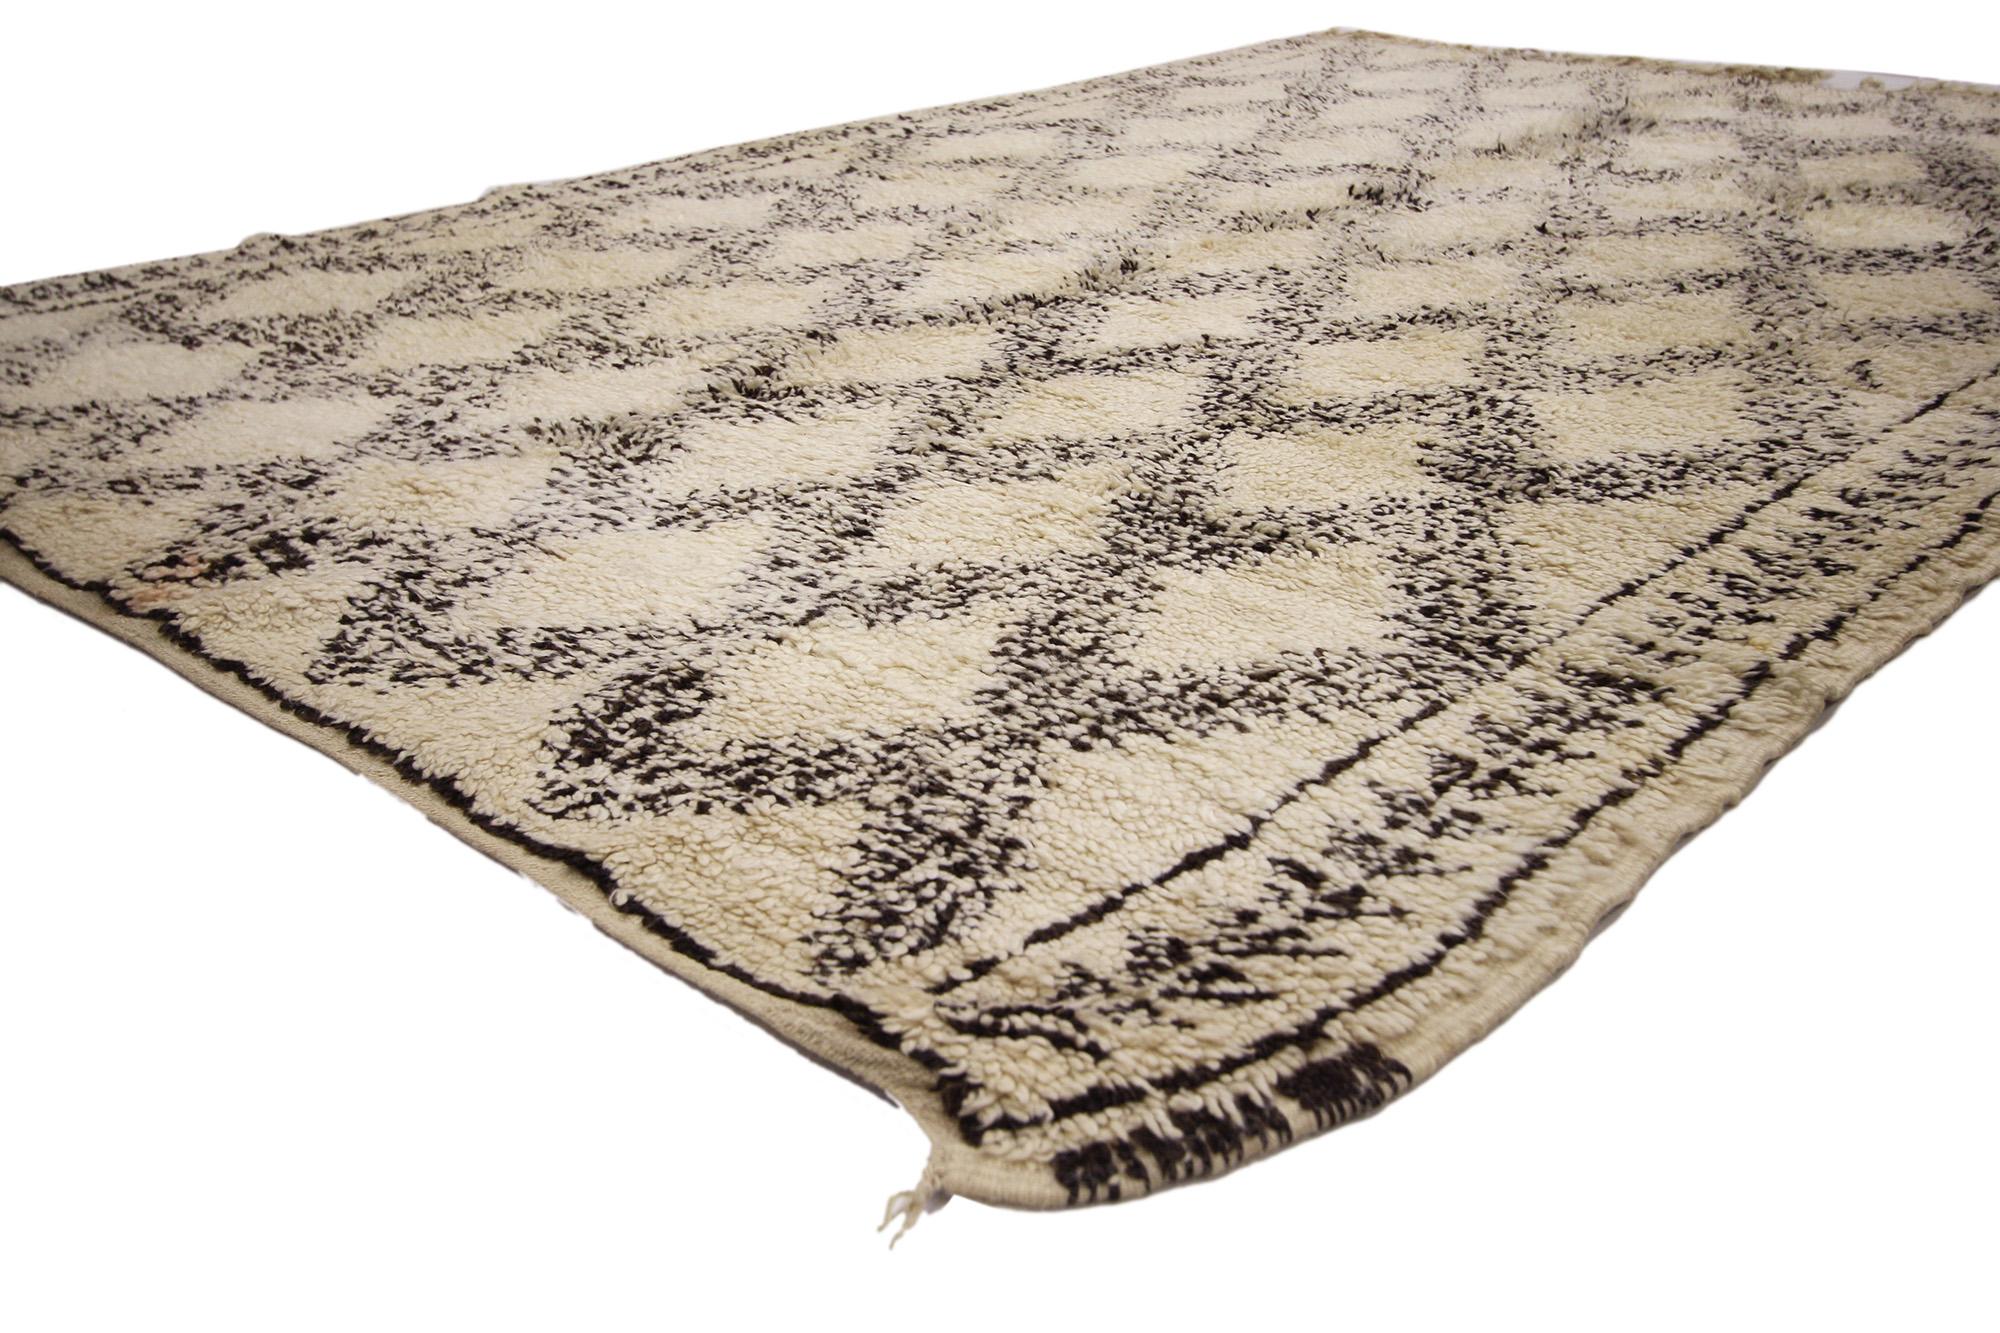 20737 Vintage Beni Ourain Moroccan Rug, 06'01 x 08'06. Originating from the esteemed Beni Ourain tribe in Morocco, these intricately crafted rugs honor tradition with meticulous attention to detail, utilizing untreated sheep's wool to infuse spaces